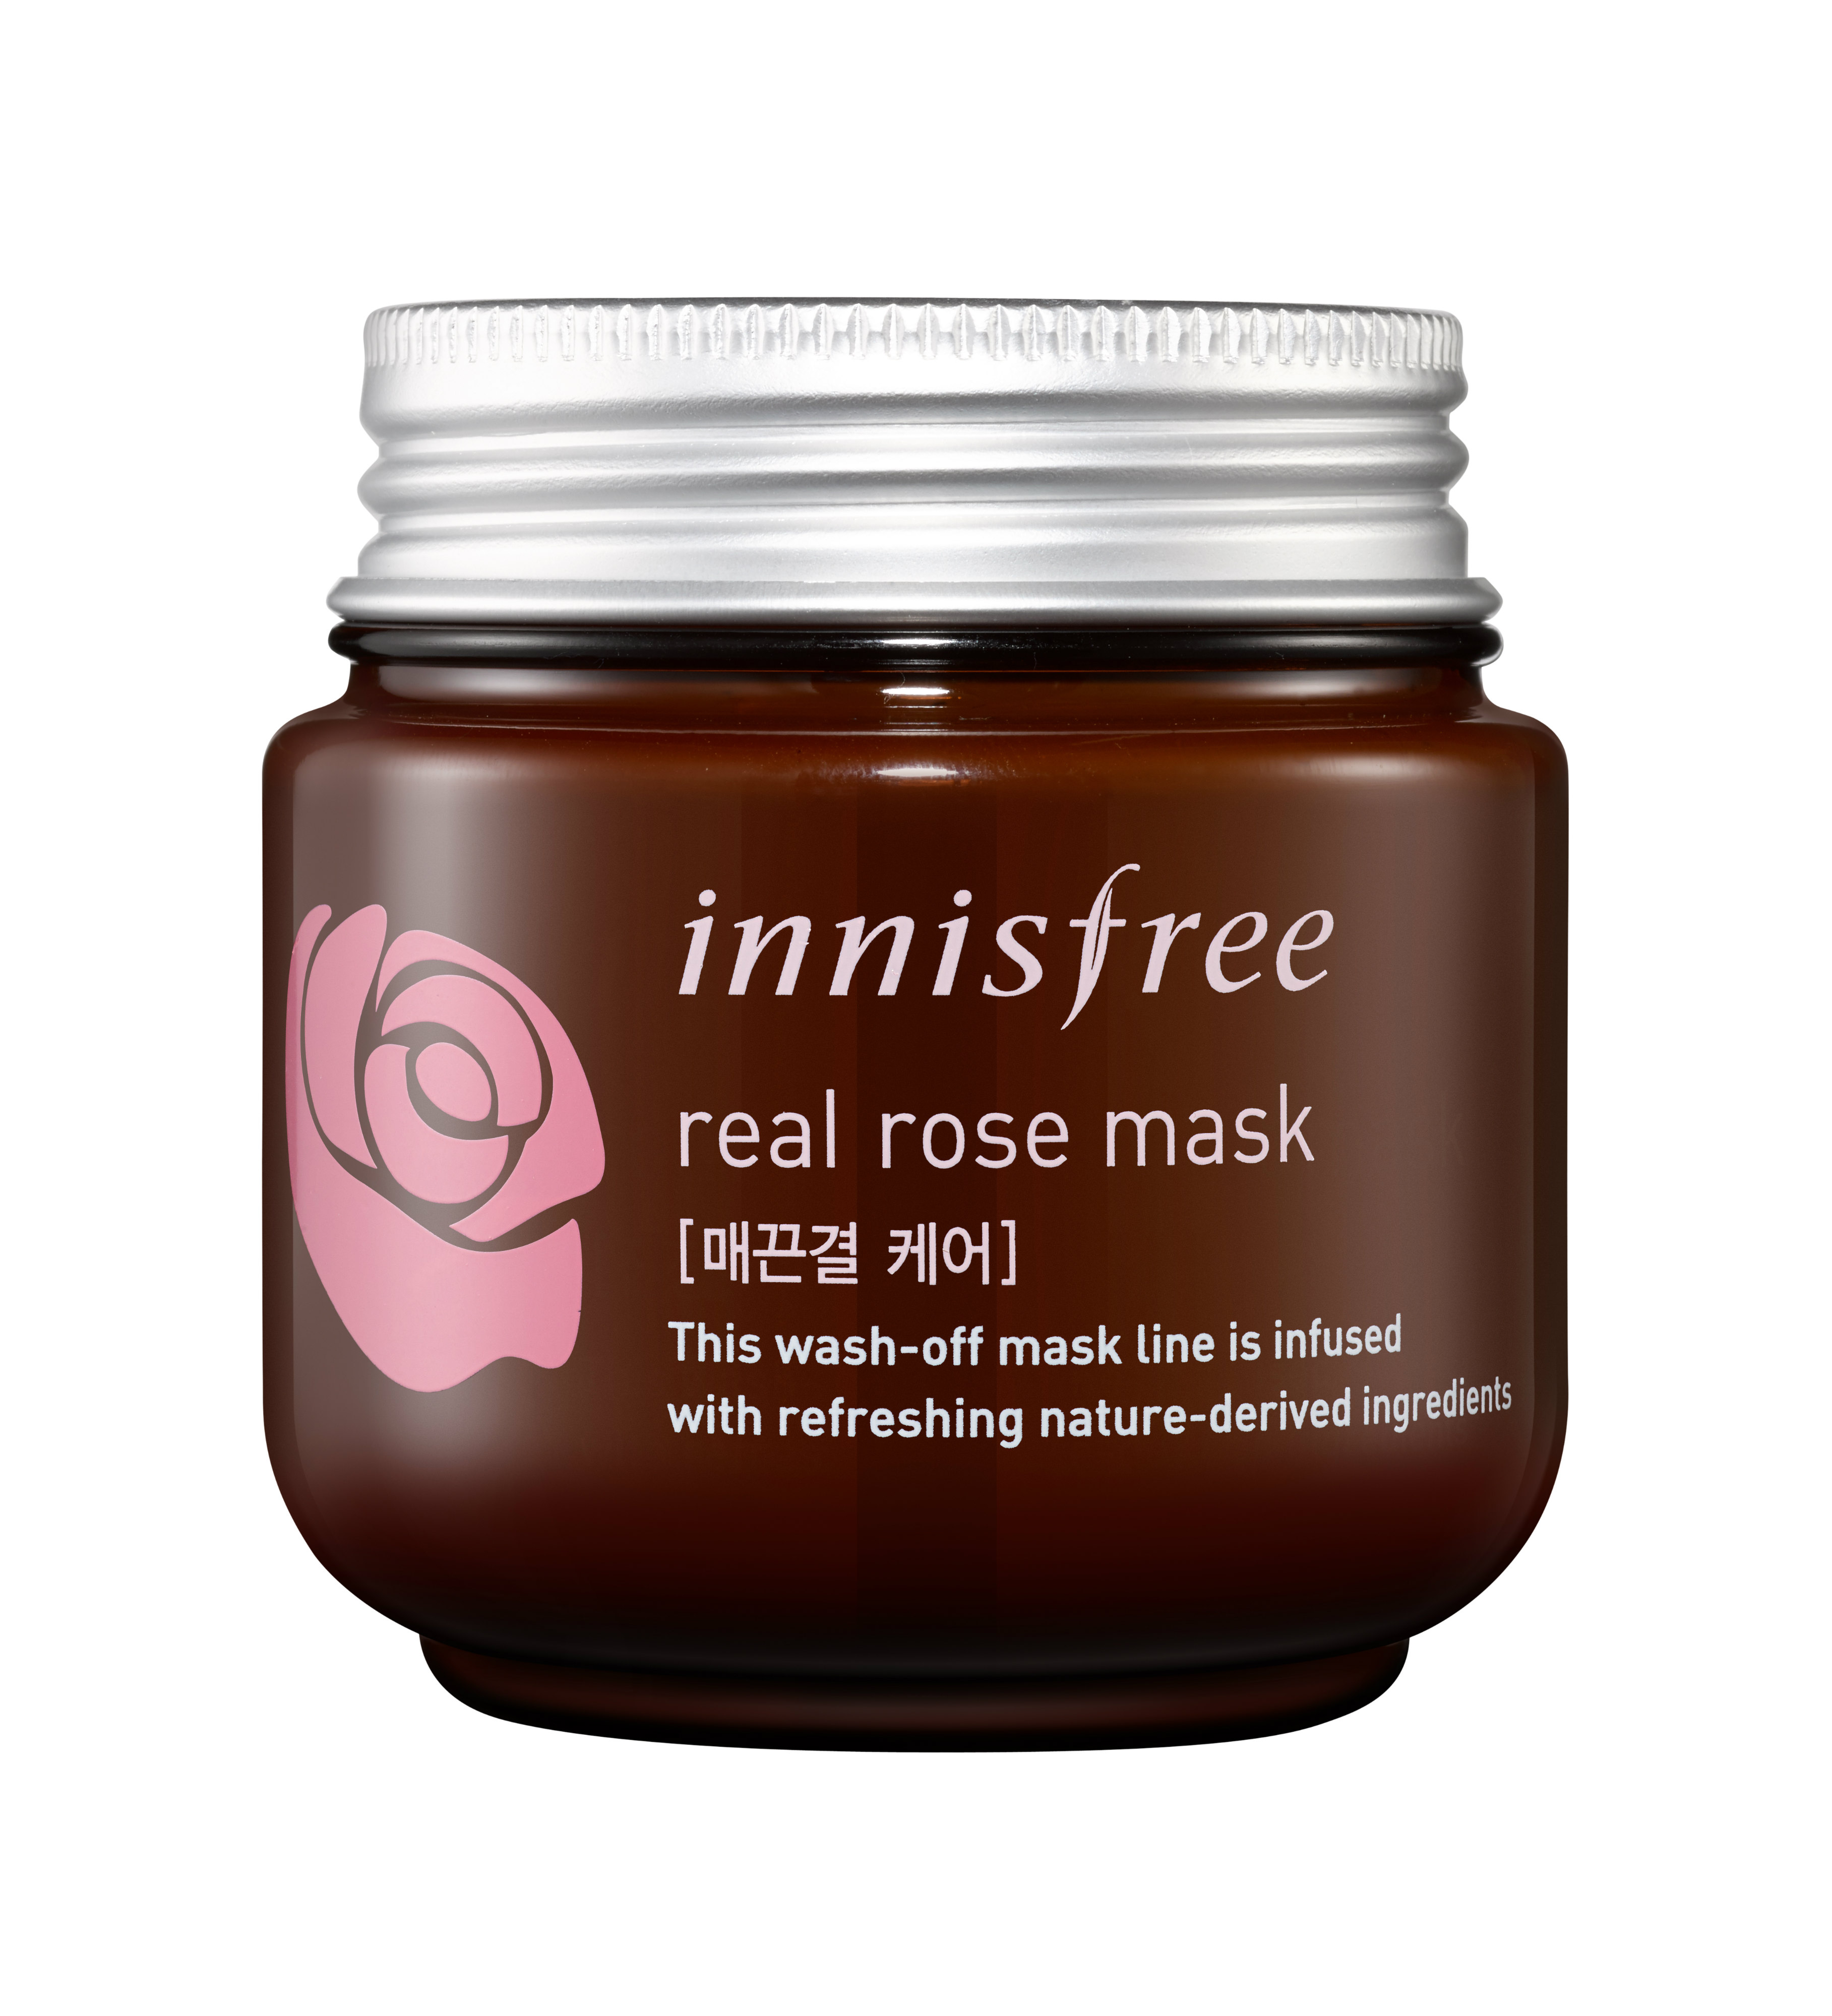 innisfree Real Rose Mask_100ml_RM53.00-Pamper.my